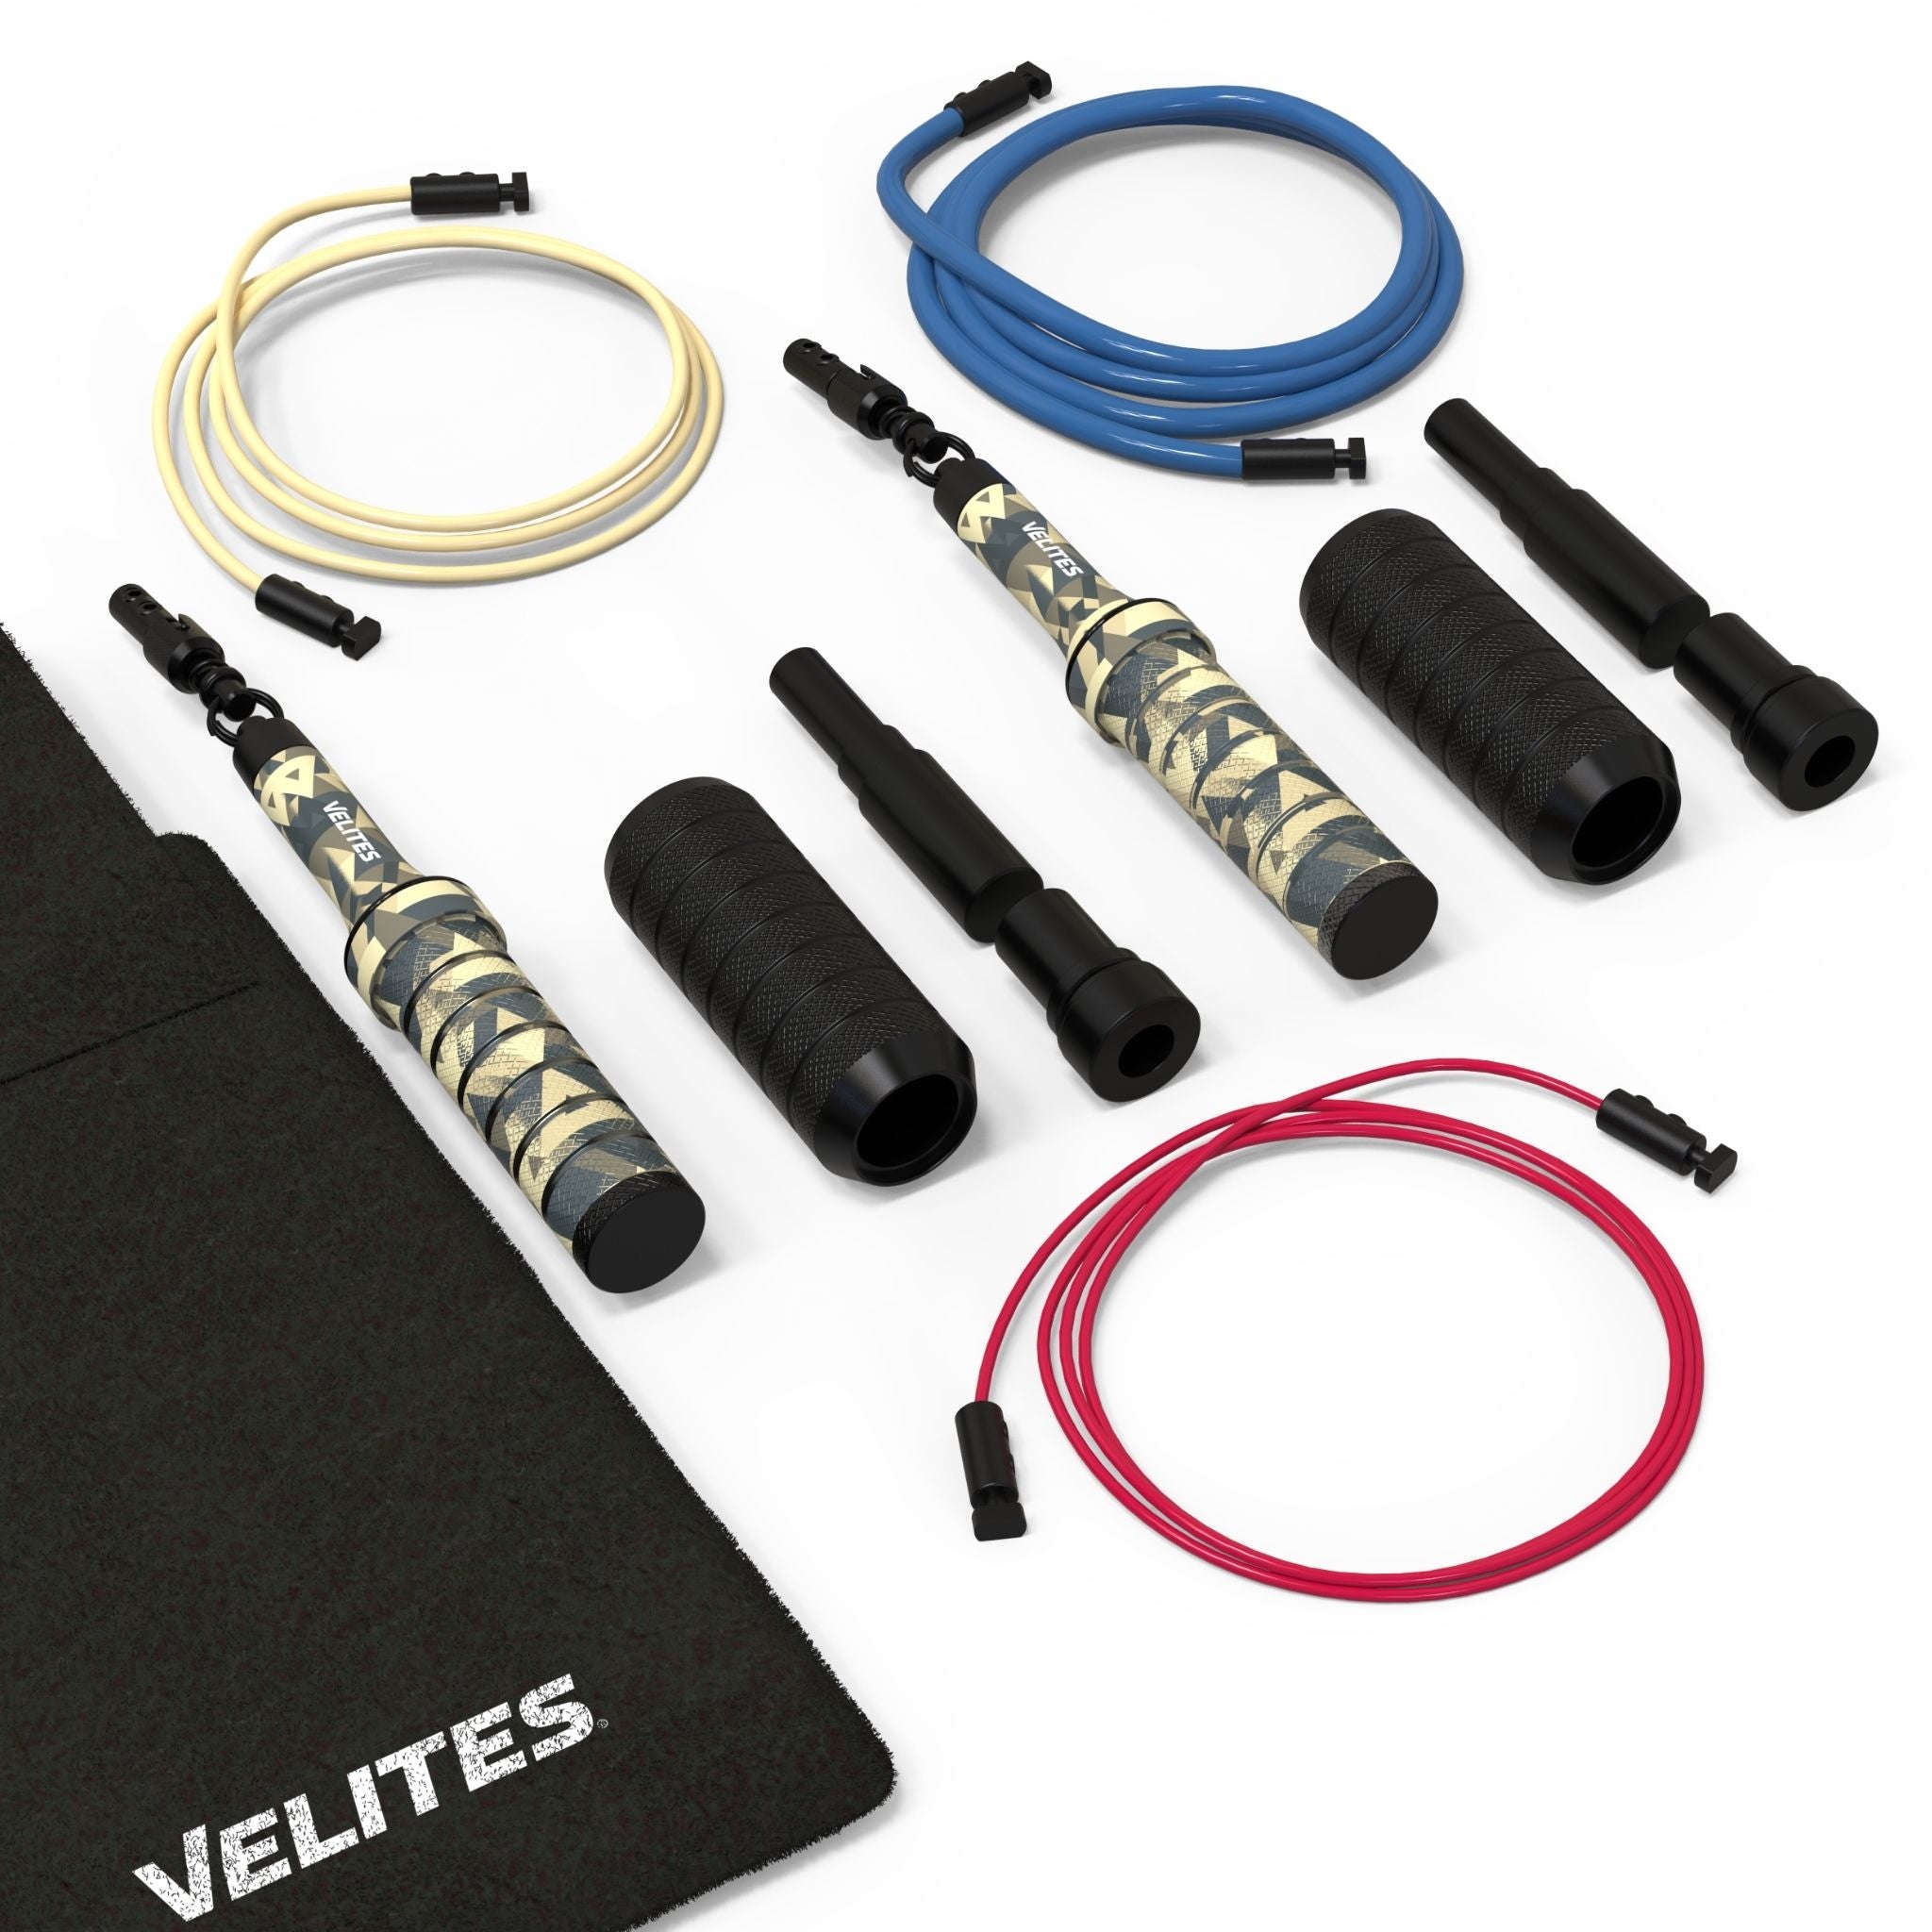 Pack Comba Earth 2.0 Velites + Lastres + Cables + Mat - camuflaje - 